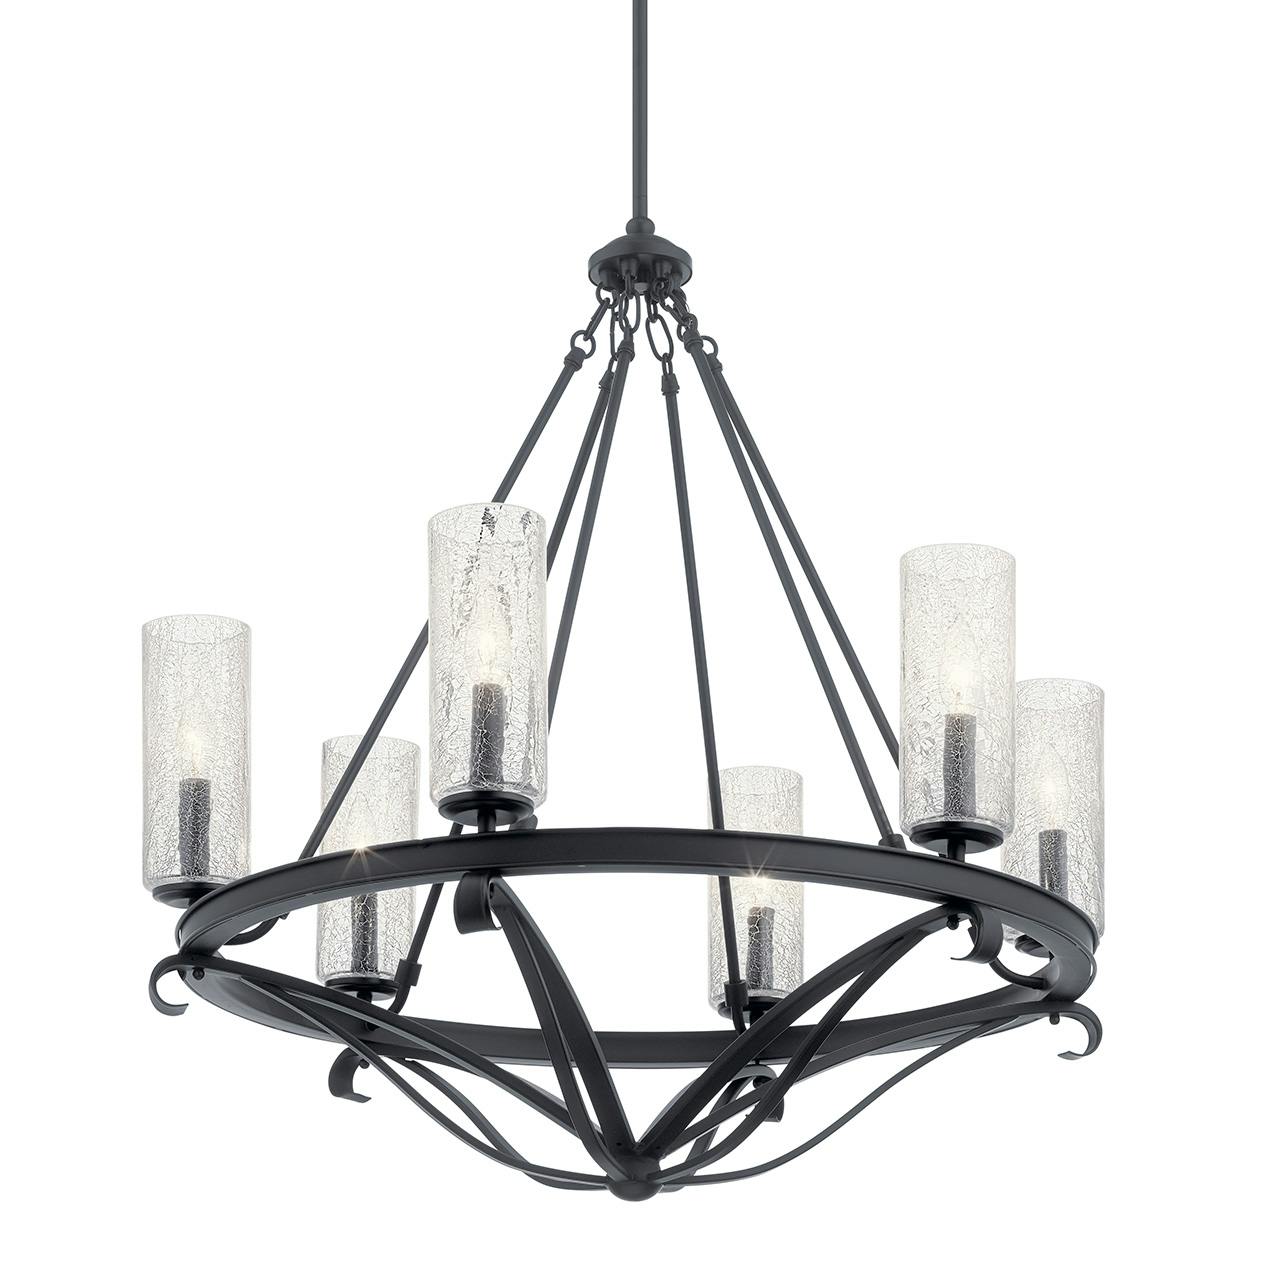 Krysia™ 6 Light Chandelier Black without the canopy on a white background